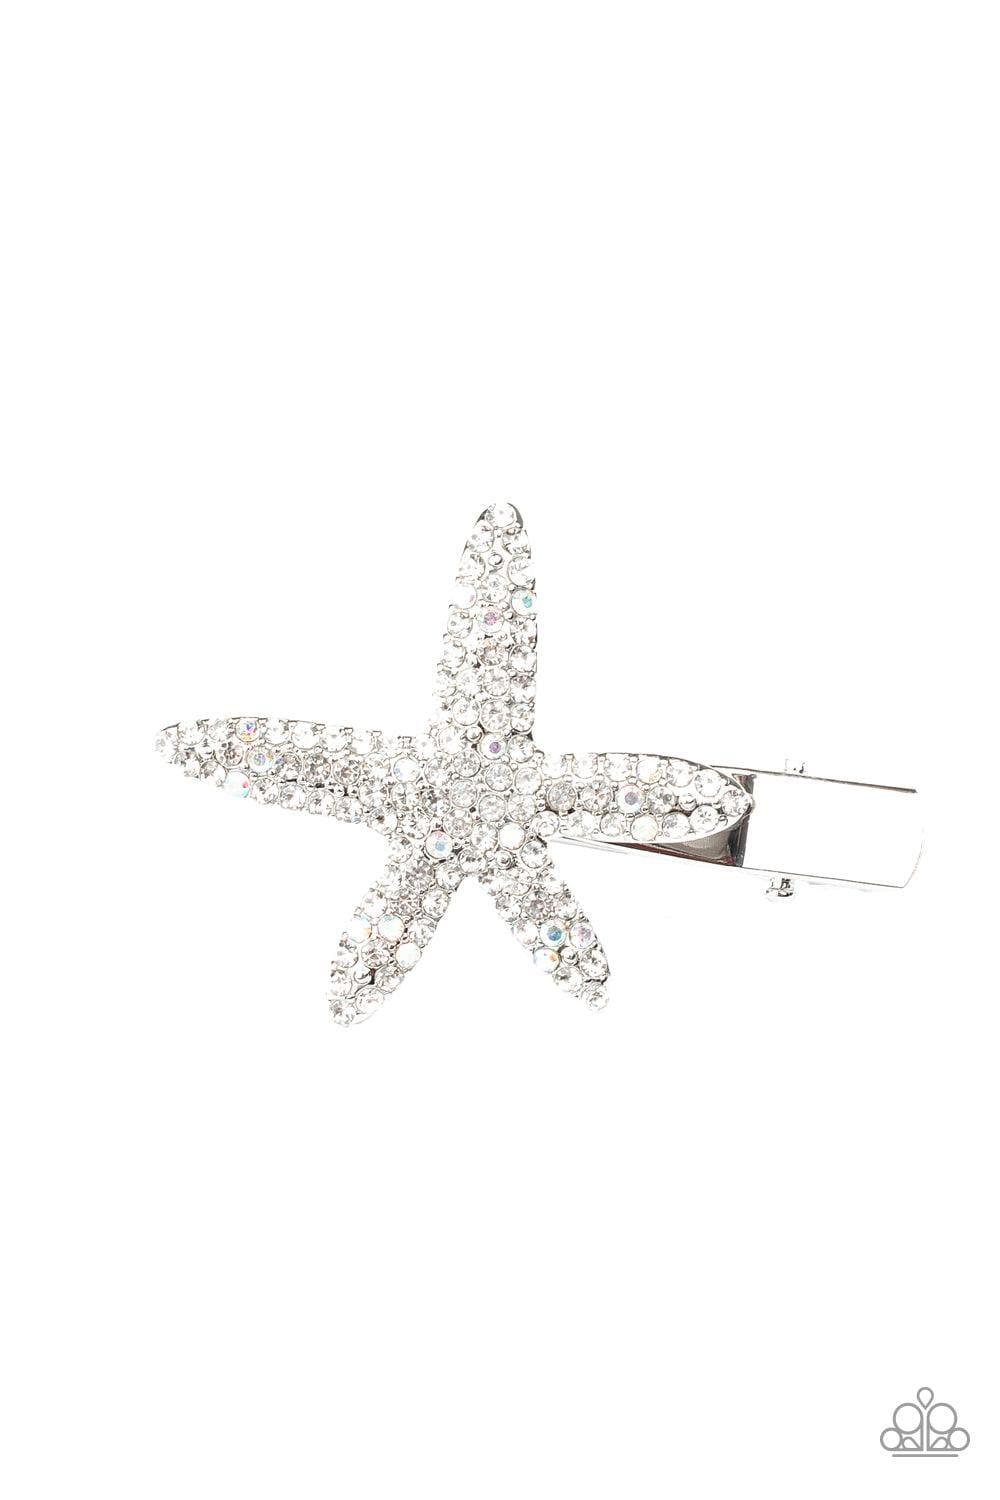 Paparazzi Accessories - Wish On a Starfish - White Hair Clip - Bling by JessieK